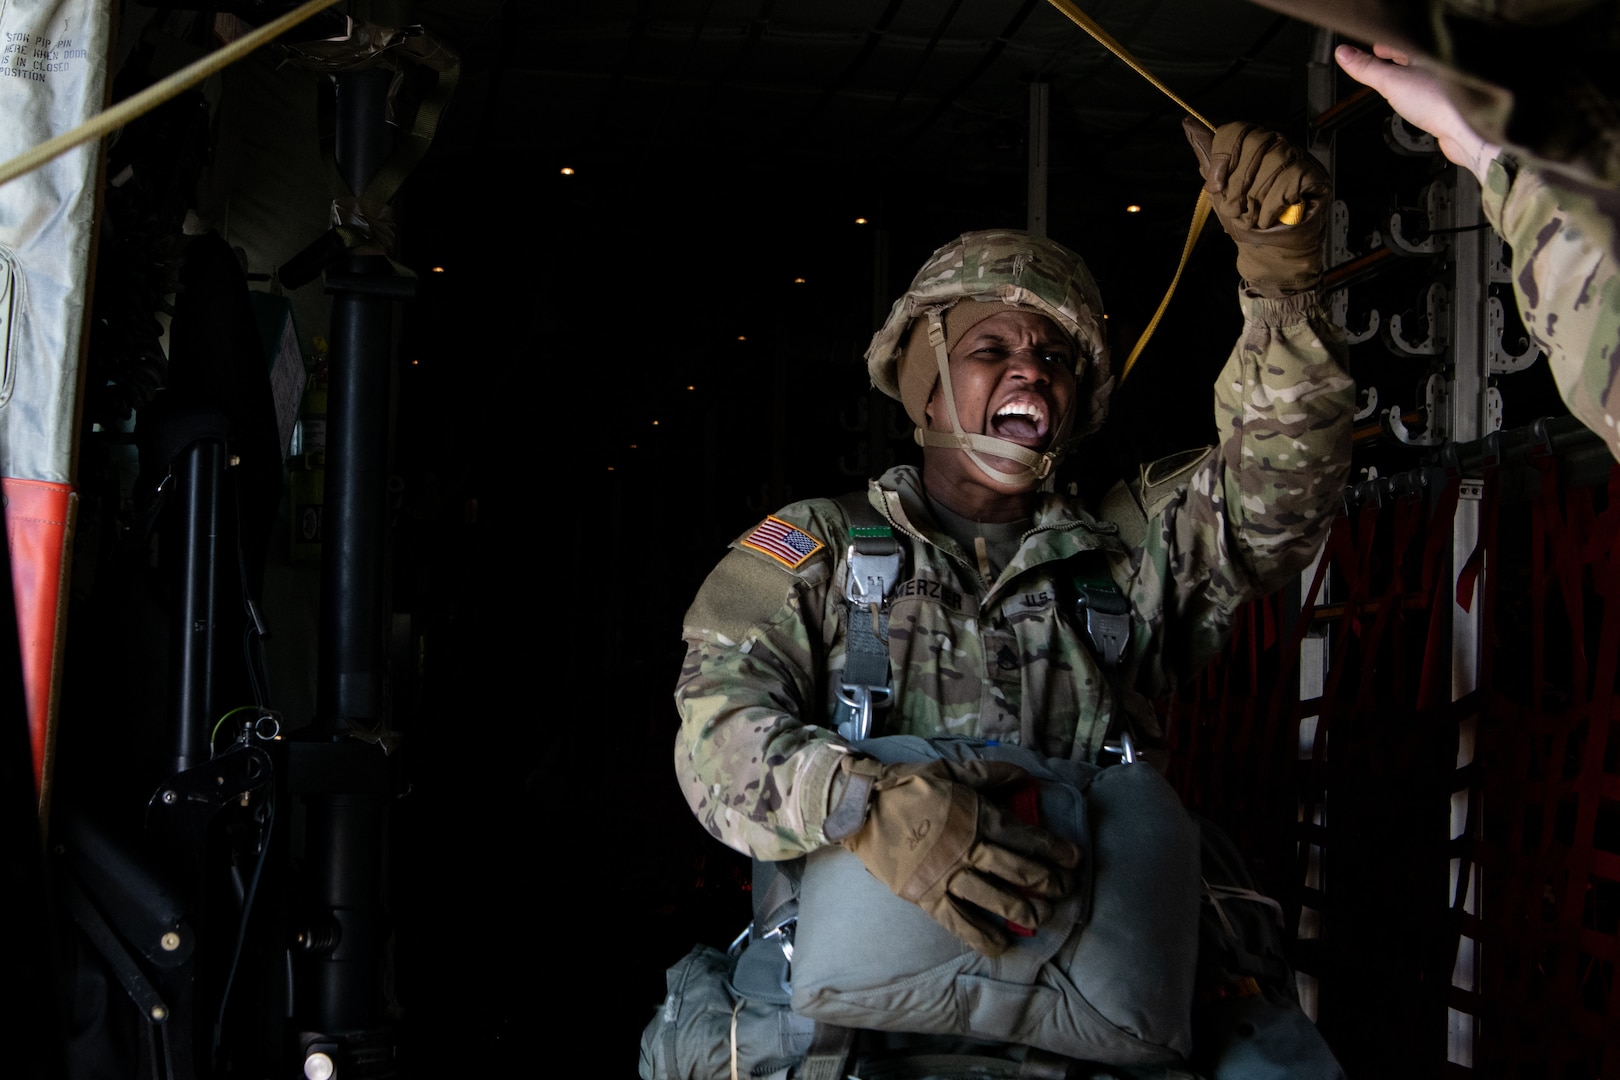 A photo of a paratrooper yelling as the move to exit an aircraft